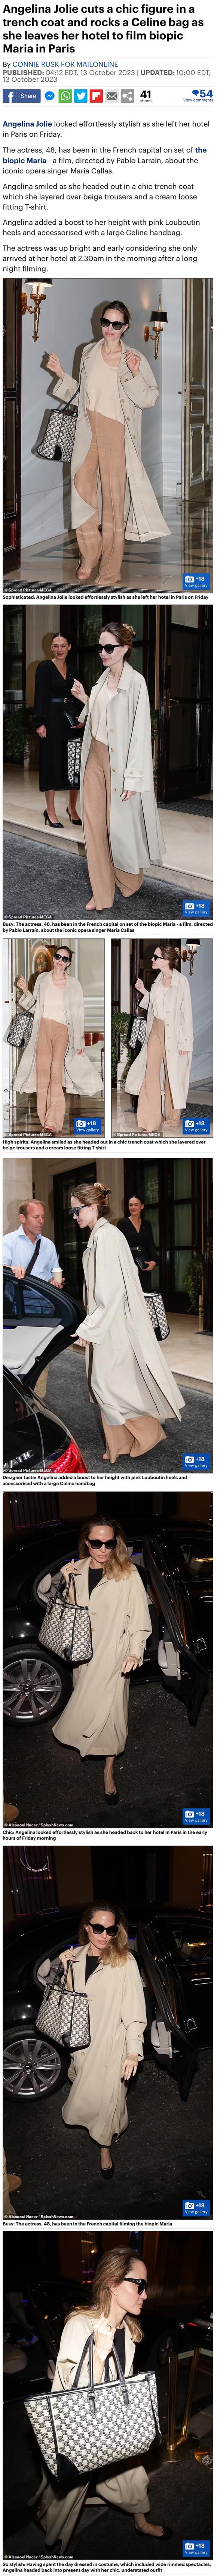 Angelina Jolie cuts a chic figure in a trench coat and rocks a Celine bag  as she leaves her hotel to film biopic Maria in Paris